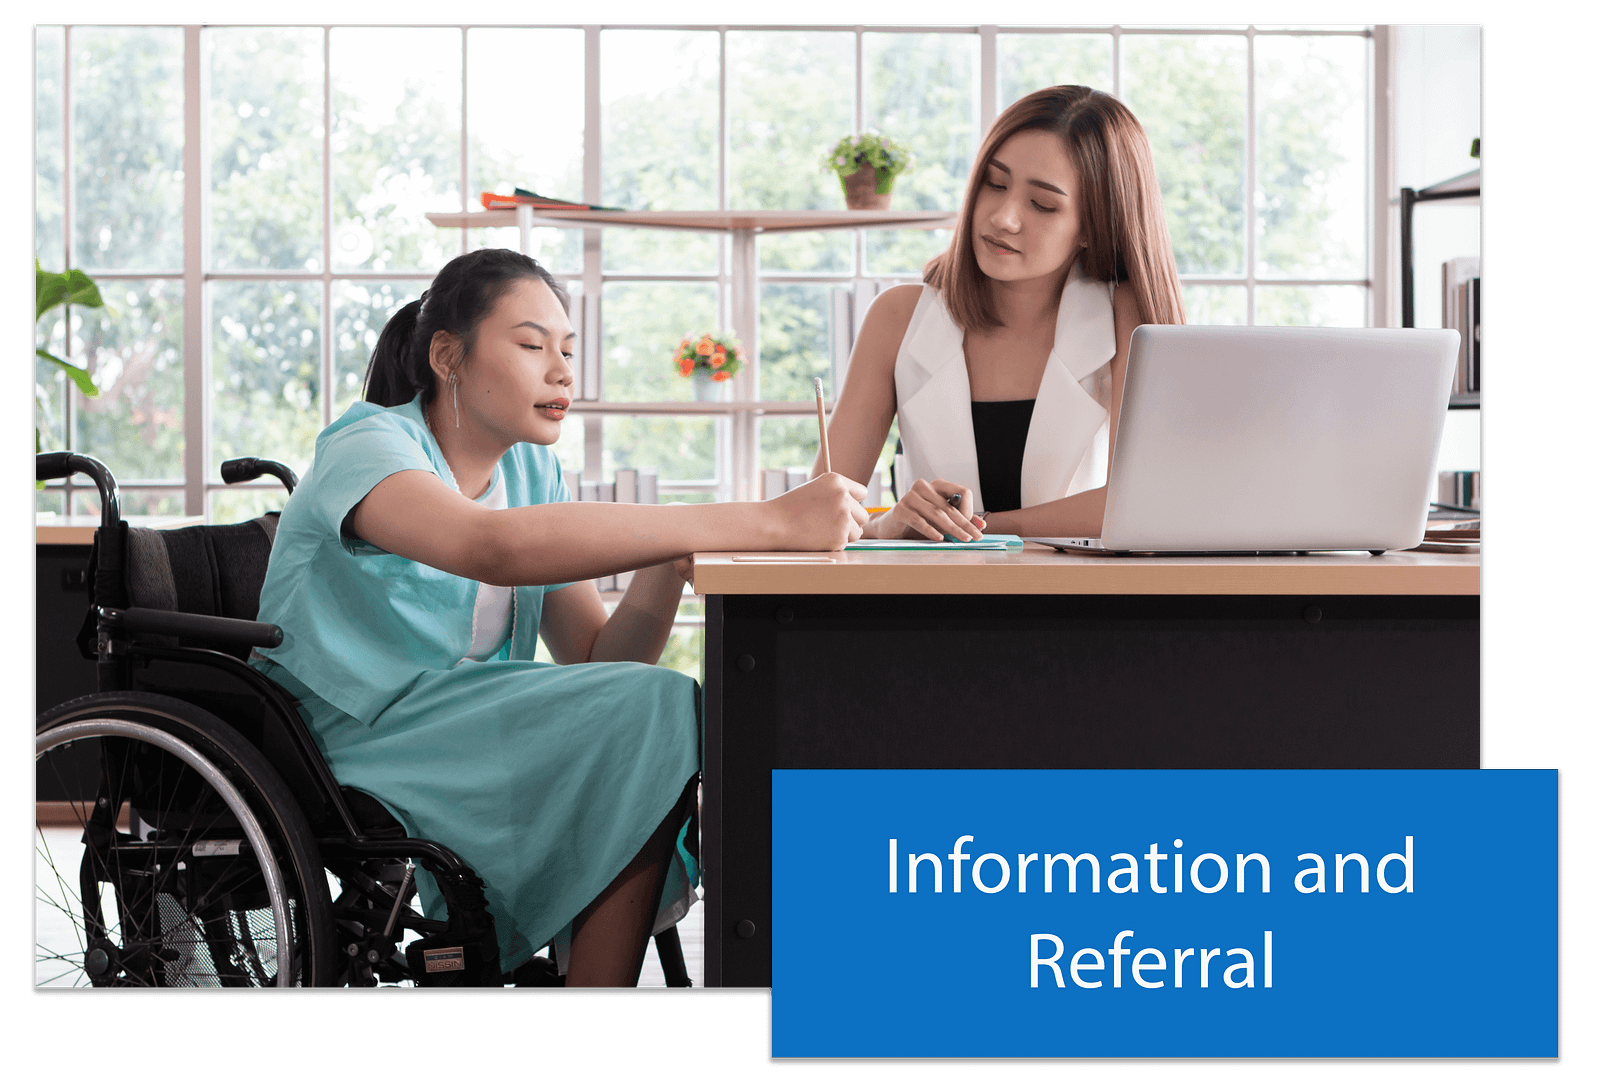 A button for Information and Referral with the image of two women working at a desk. One woman is sitting in a wheelchair, the other is in a chair behind the desk.